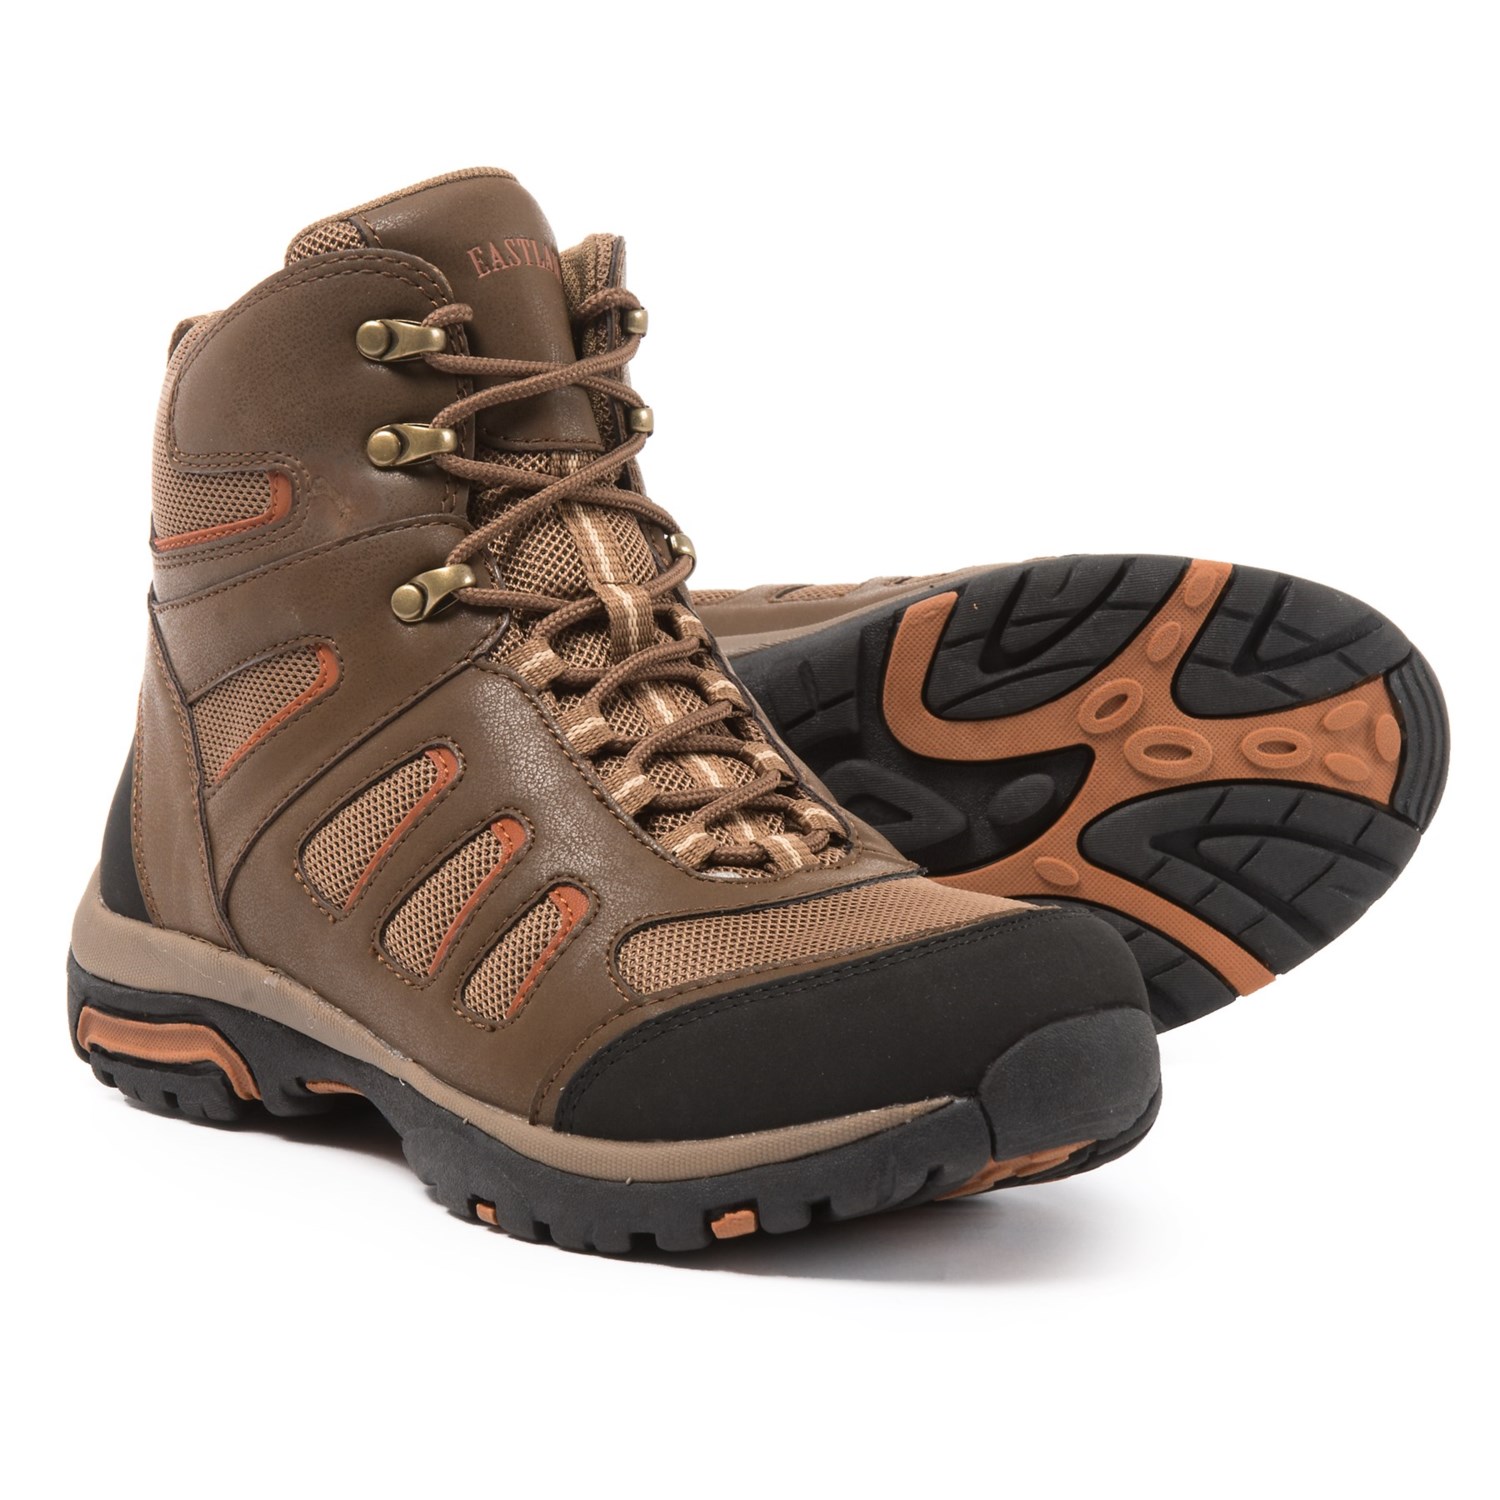 Eastland Hickory Hiking Boots (For Men)